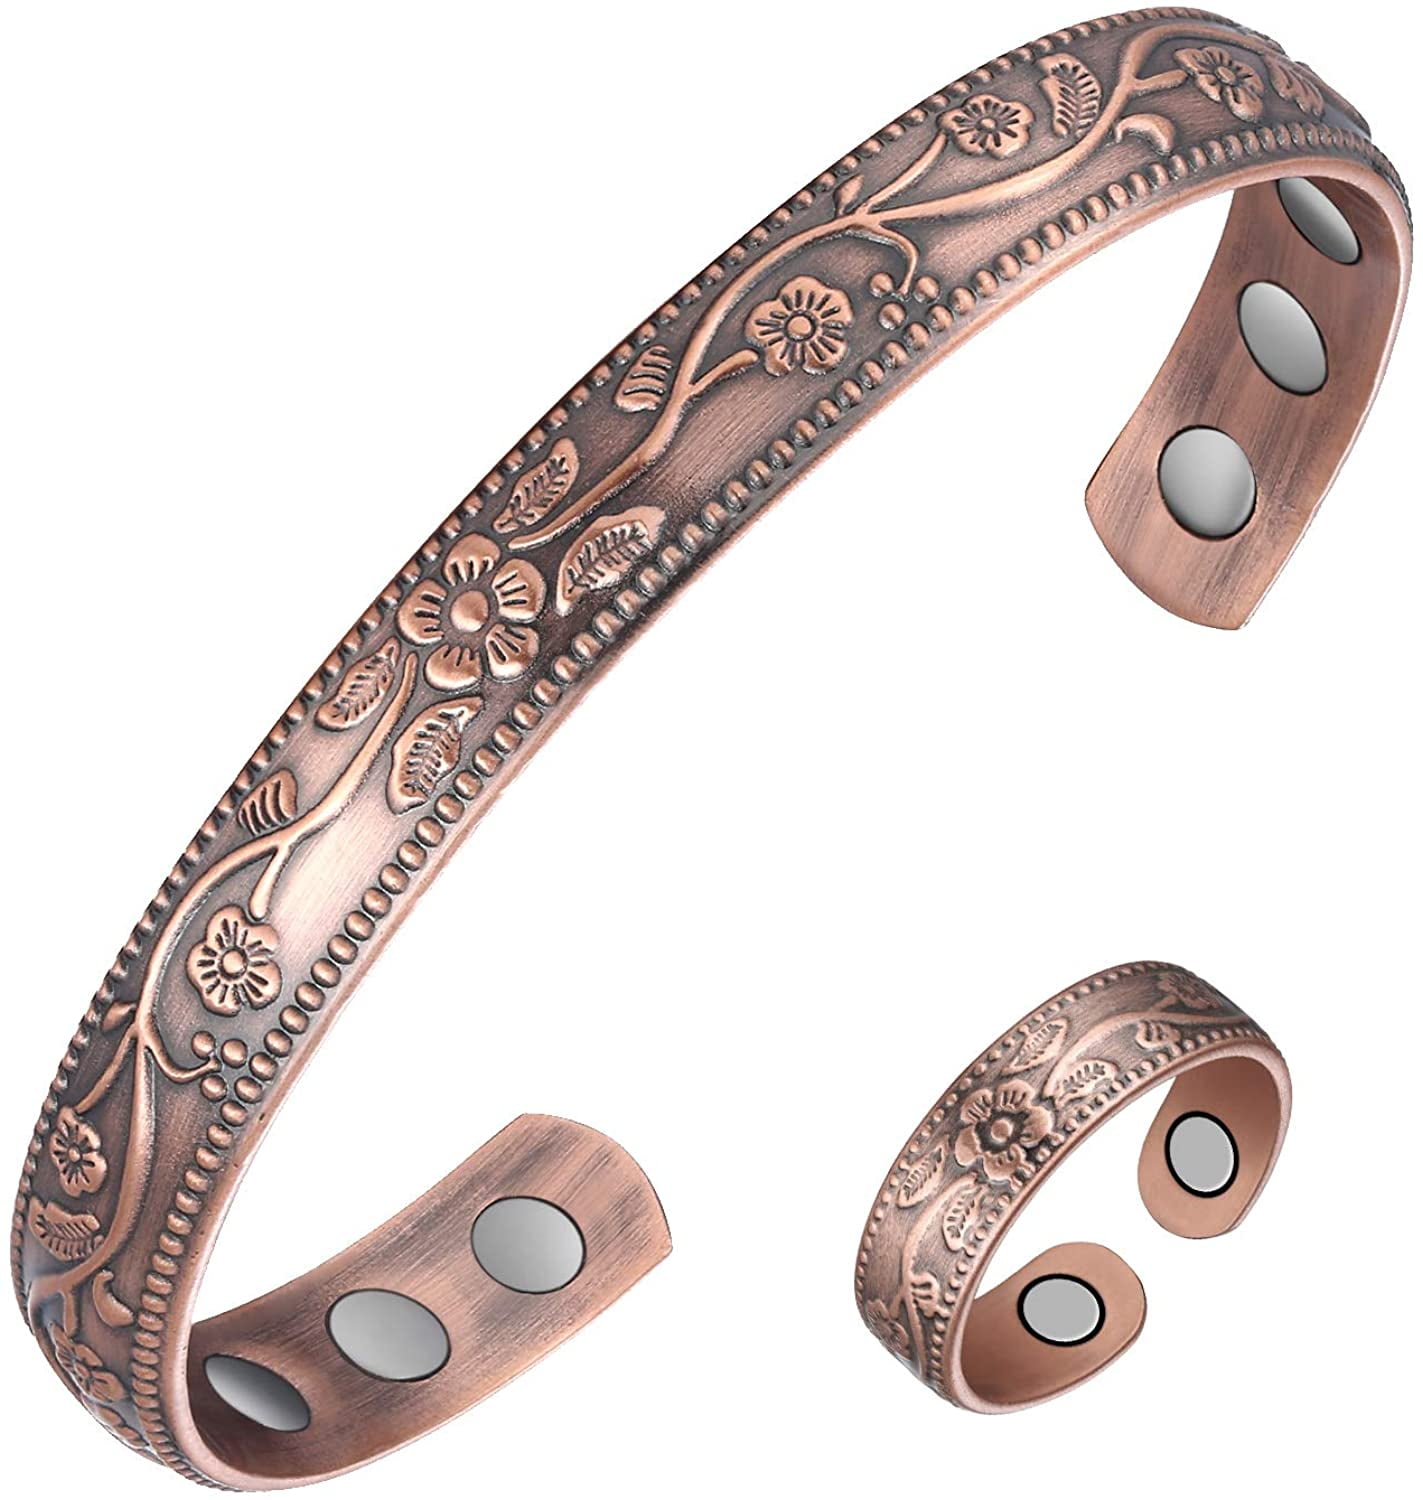 SOLID COPPER MAGNETIC CUFF BRACELET BANGLE HEART MENS WOMENS GIFT PAIN RELIEF 